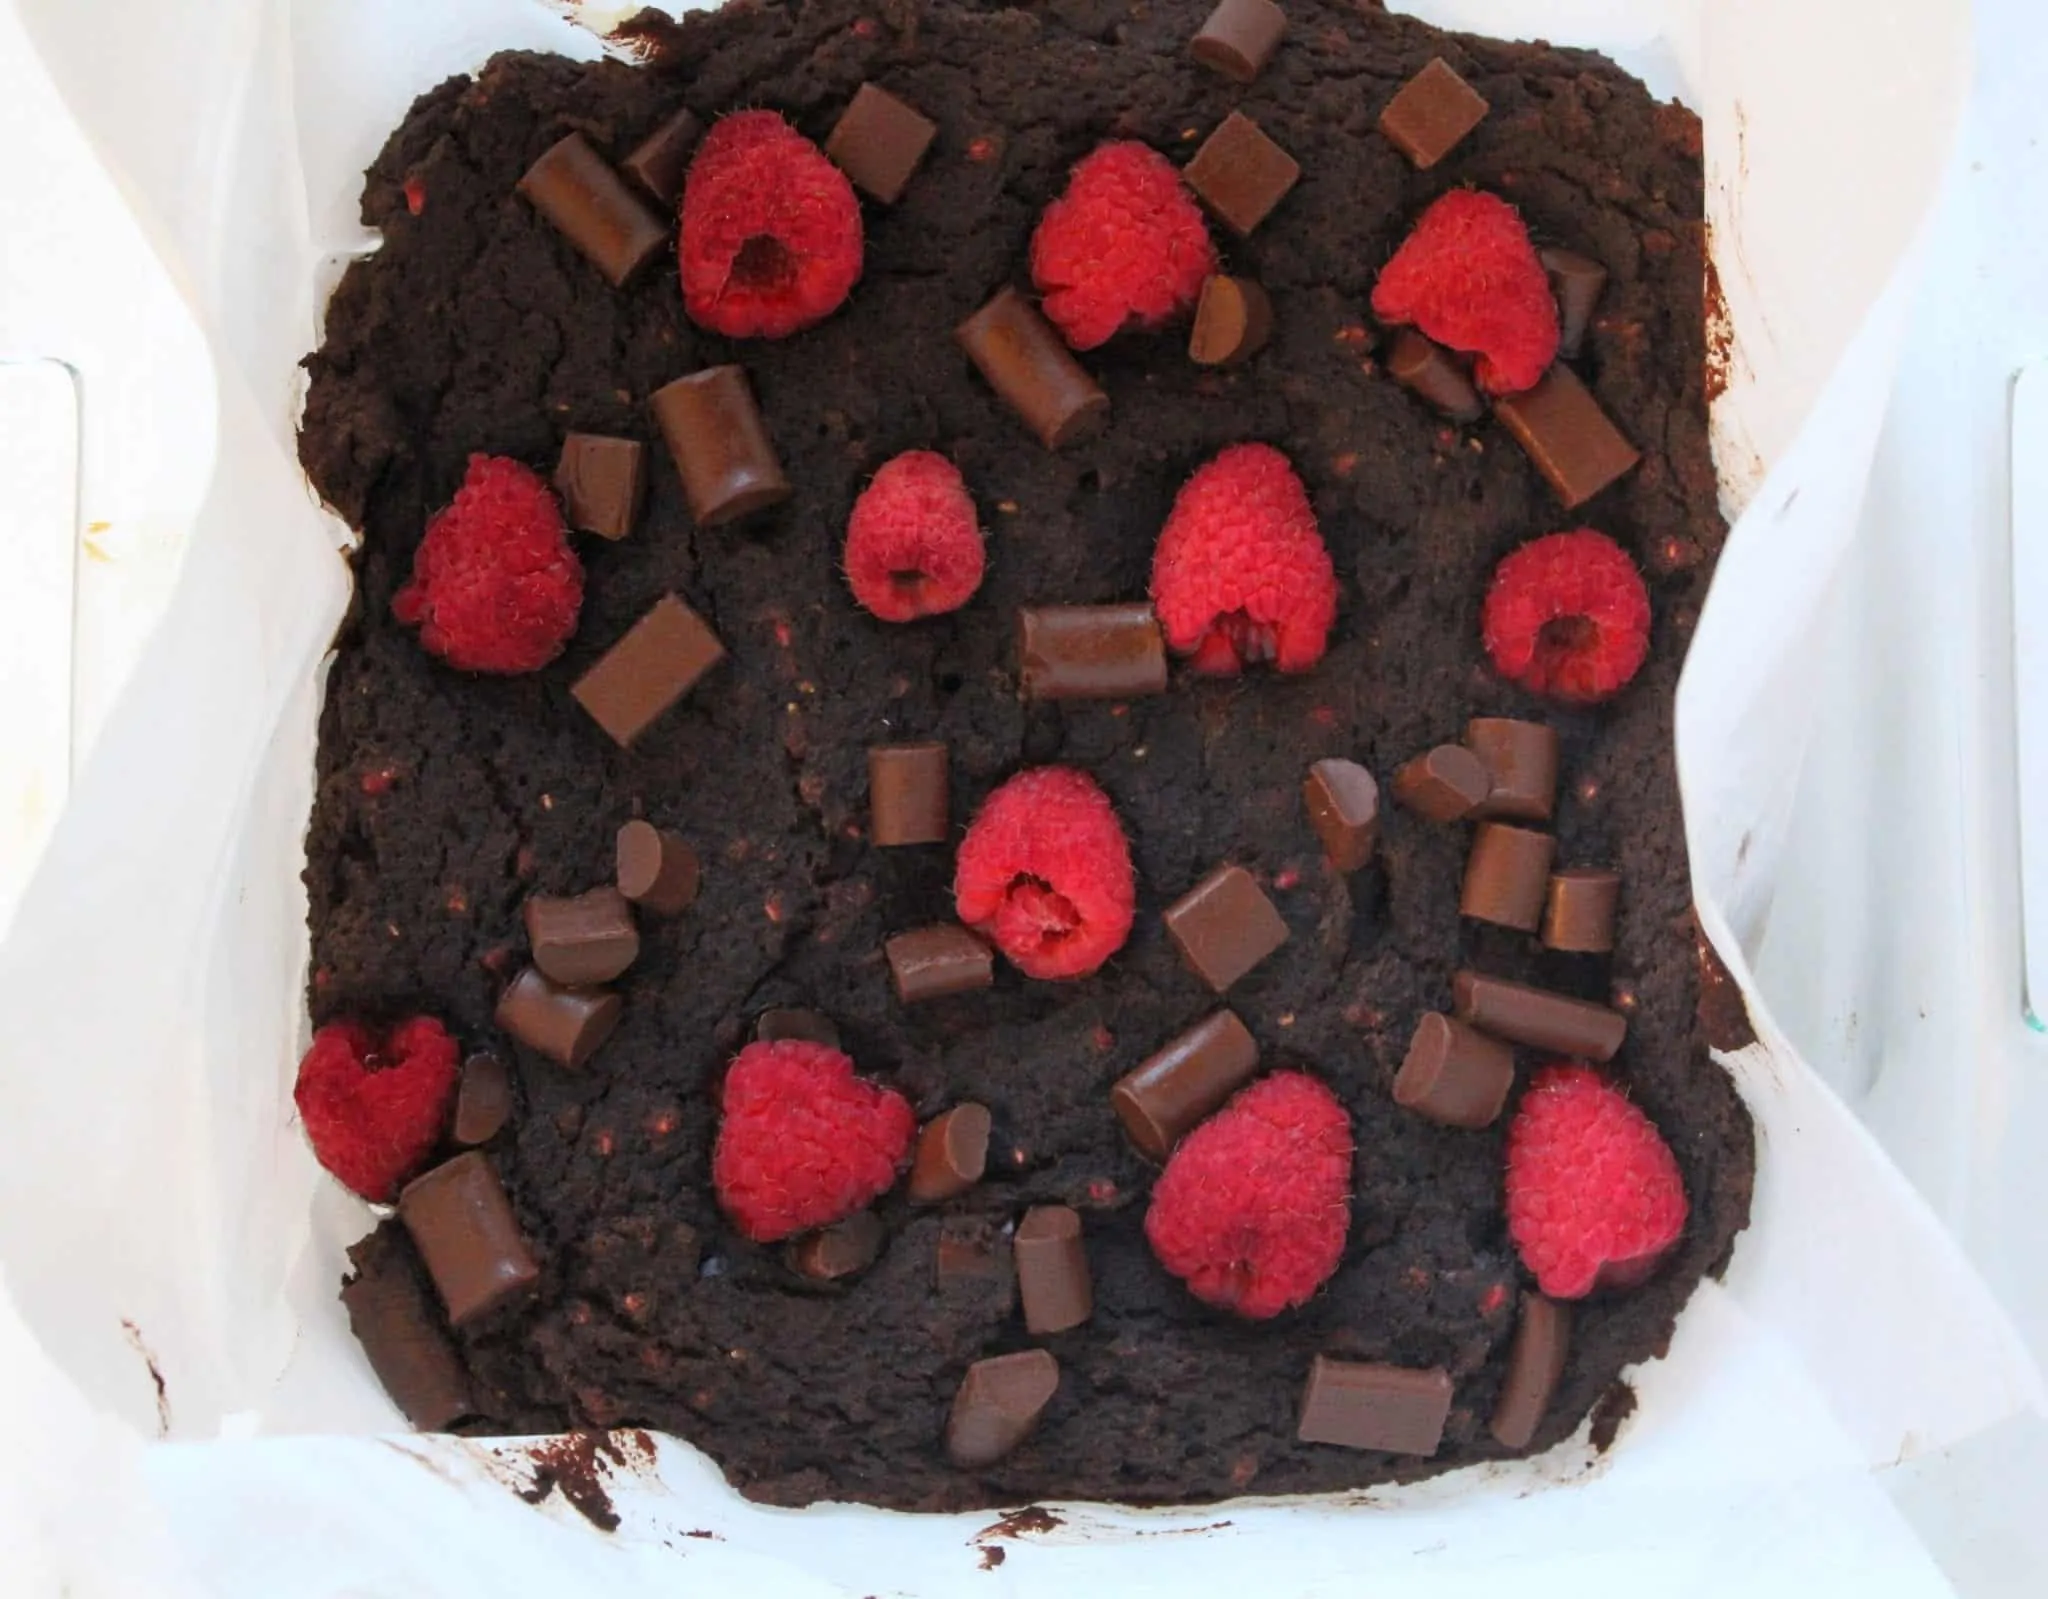 Paleo Raspberry Brownies from Treble in the Kitchen